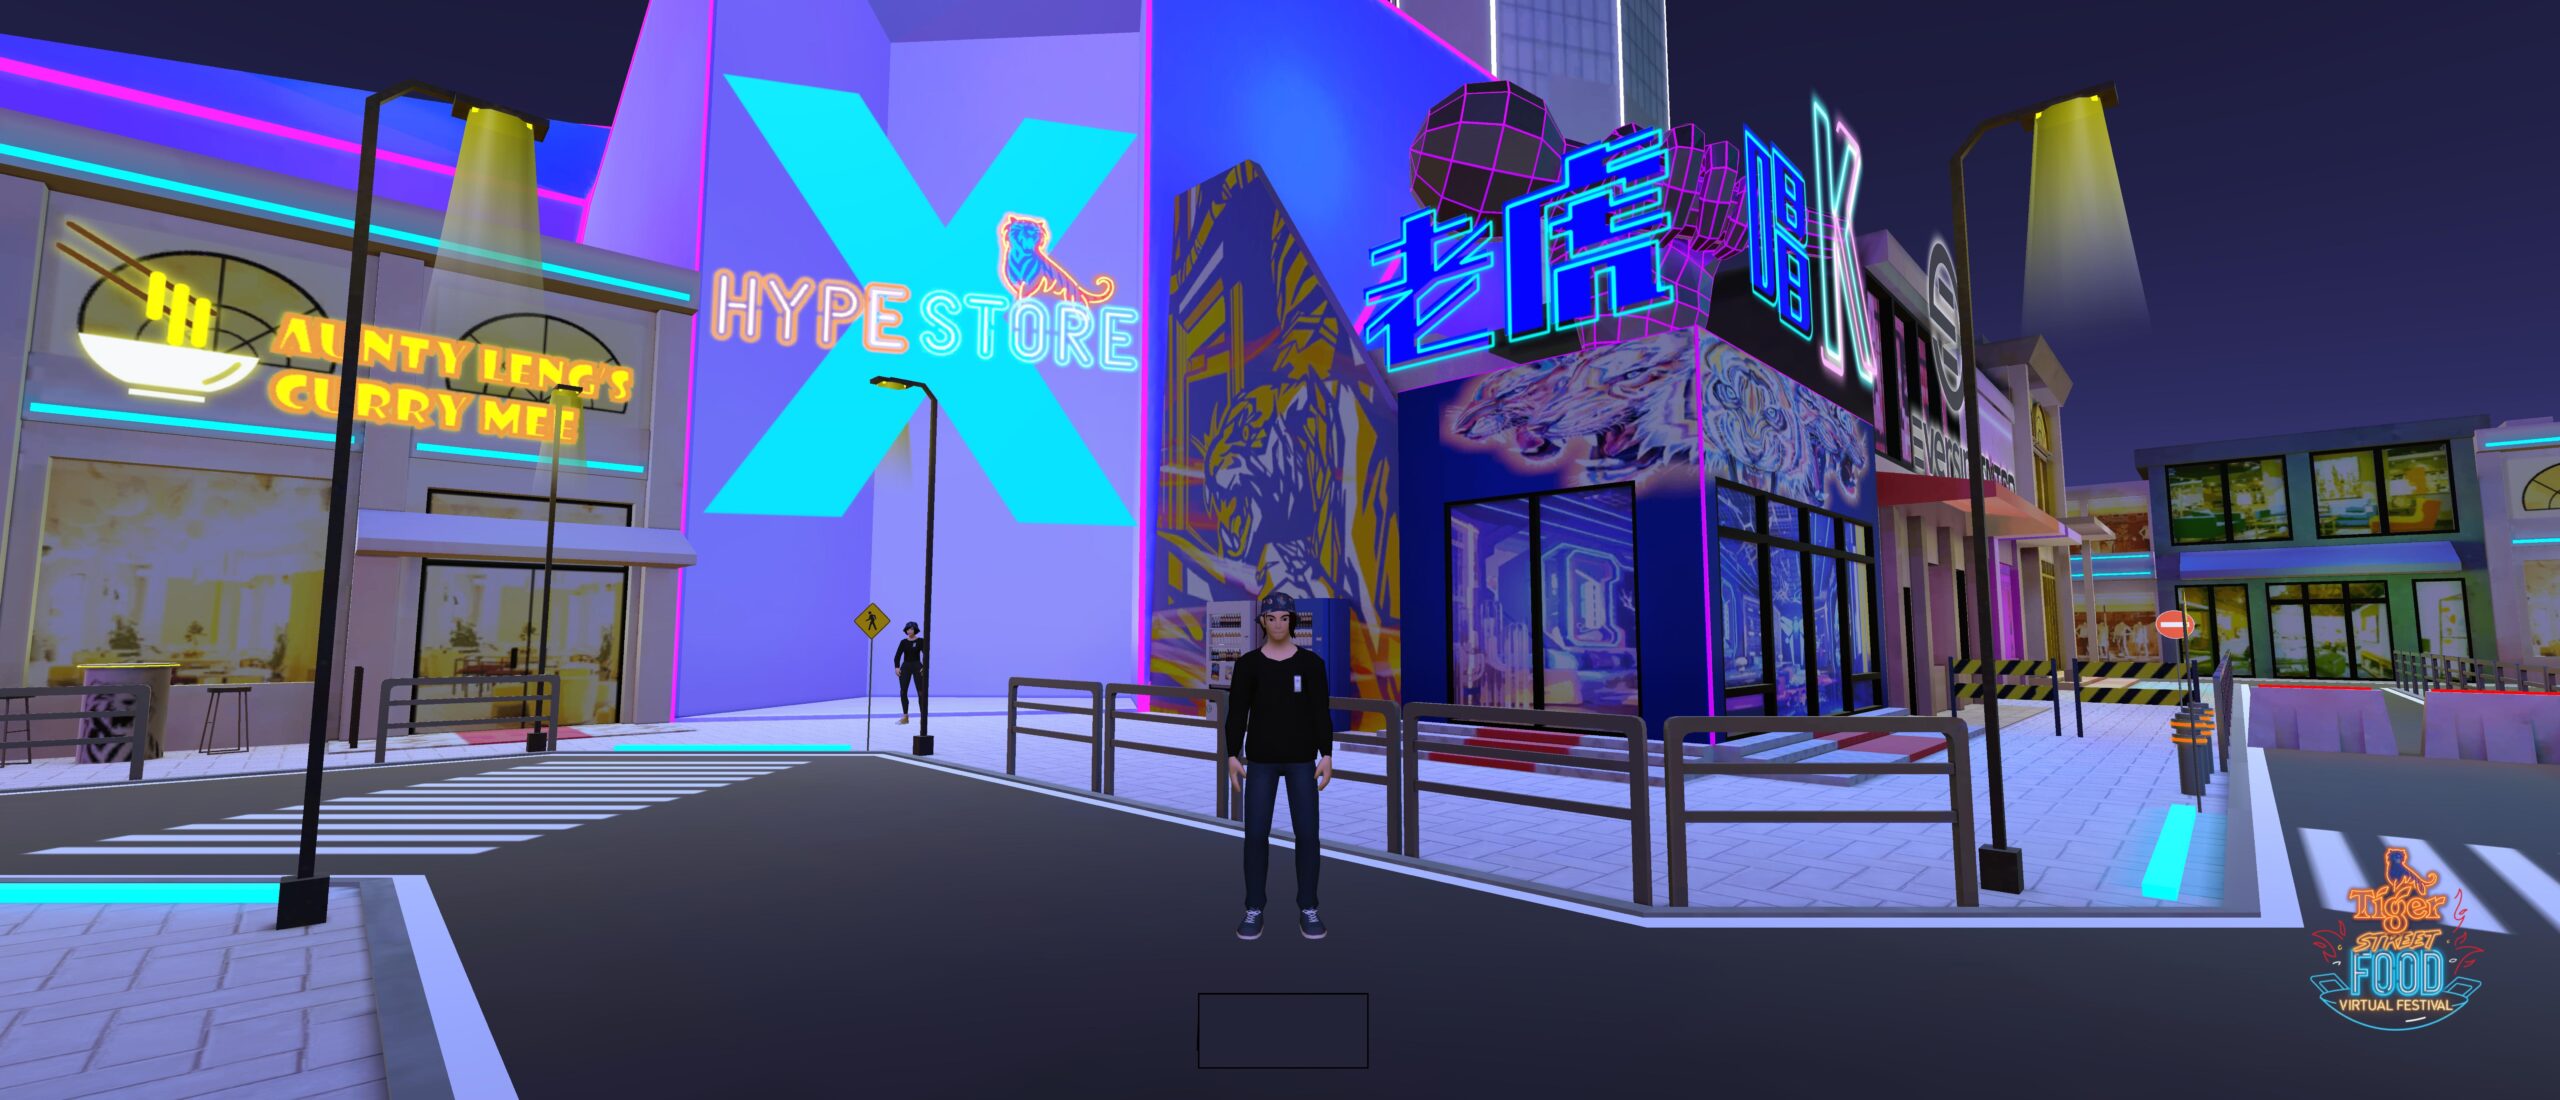 The Street Hype Store scaled